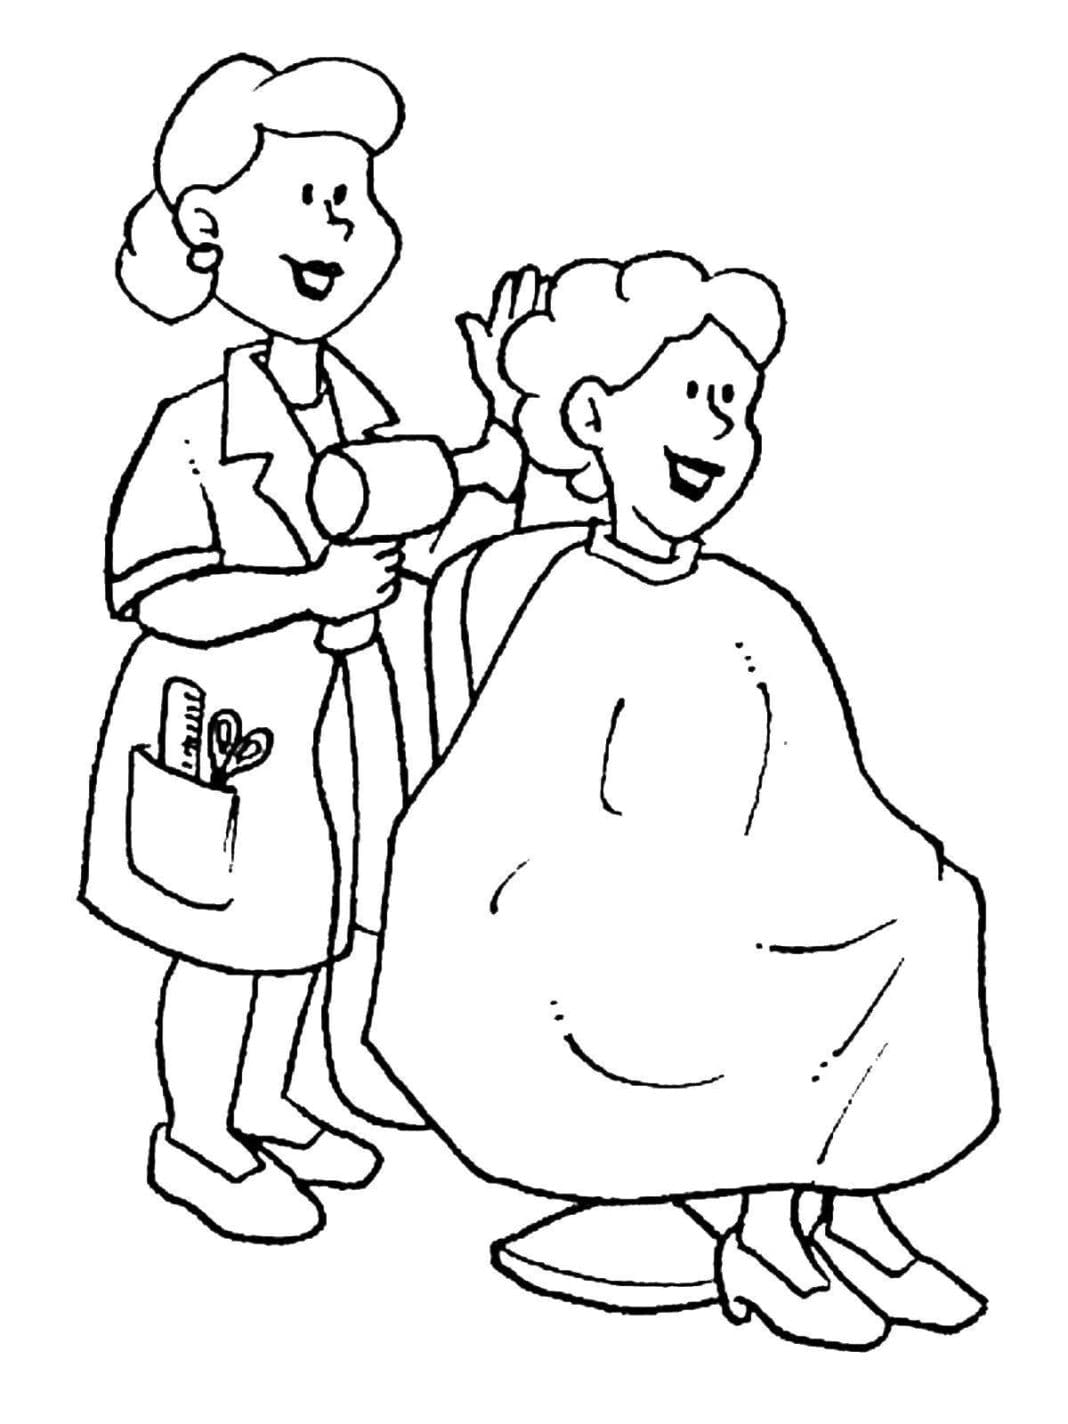 Hairdresser Salon Free Coloring Page